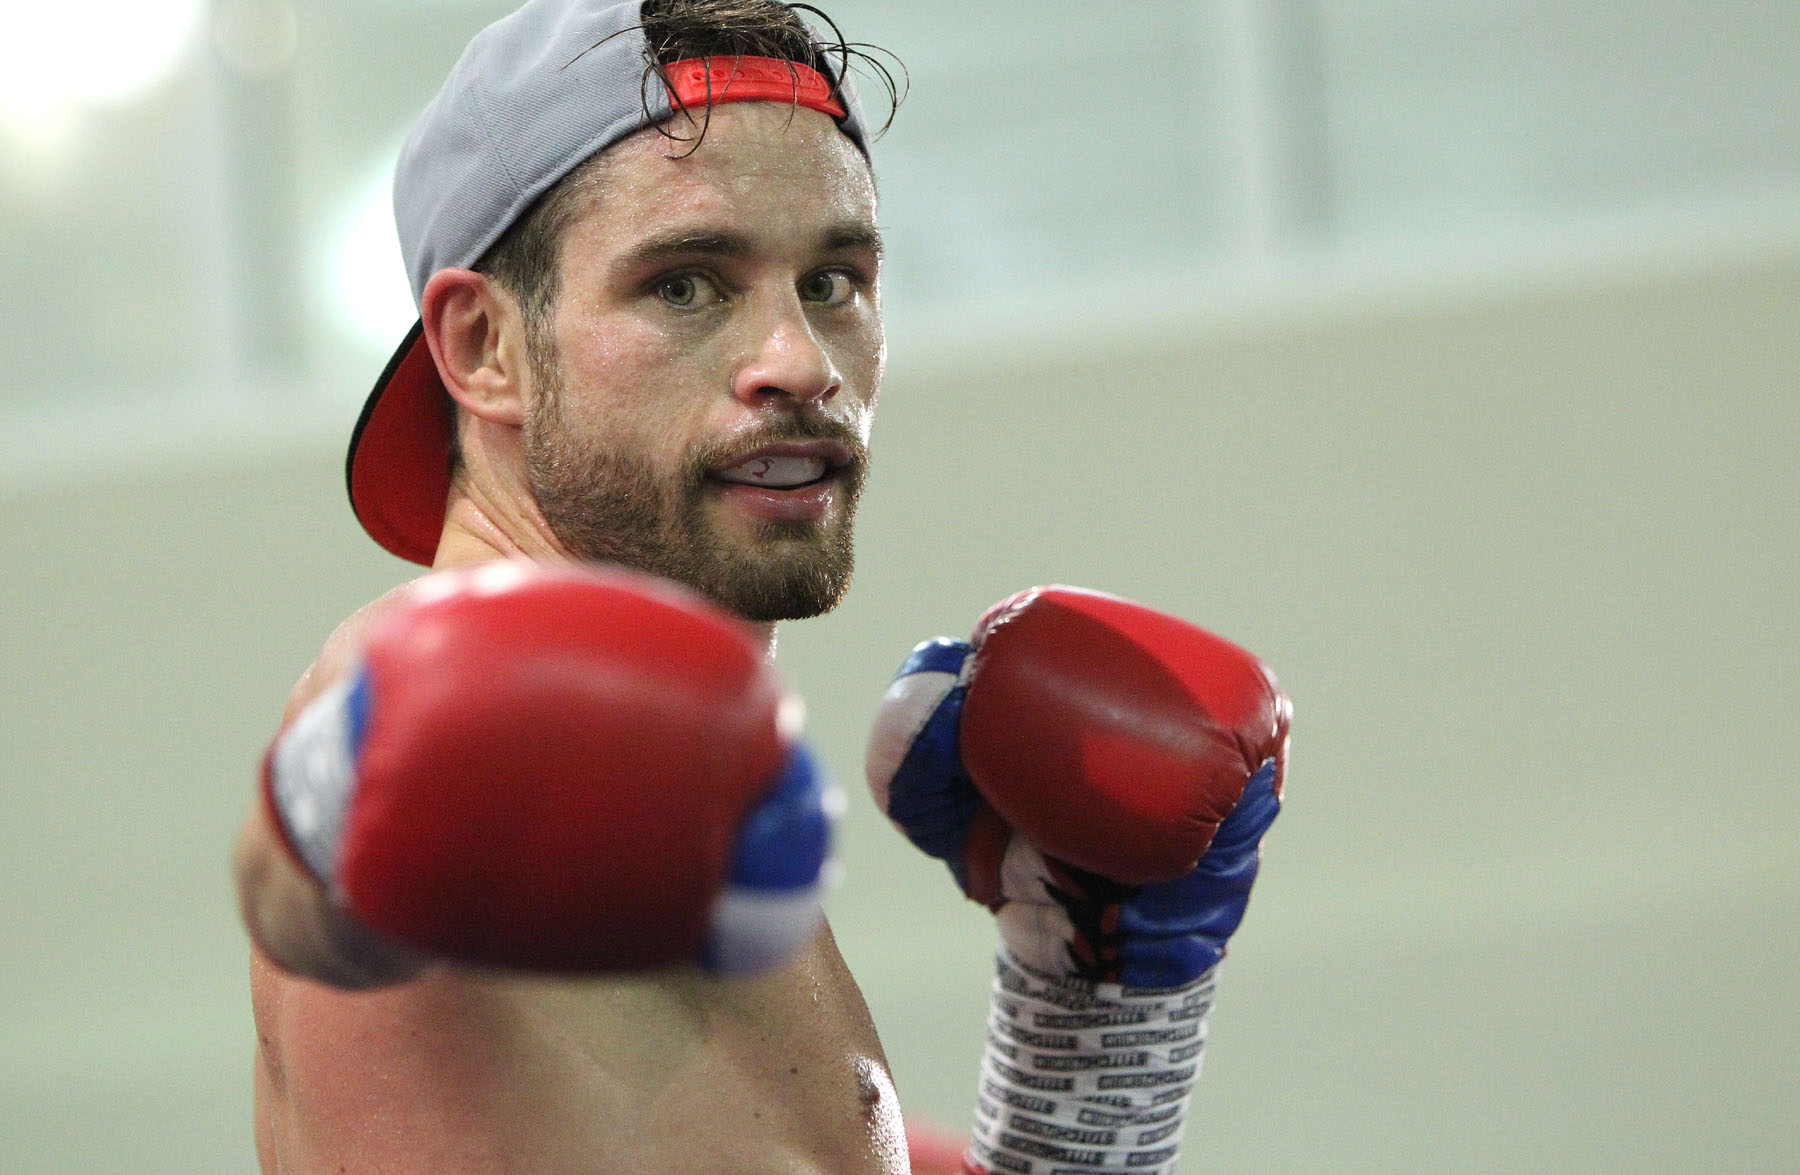 Chris Algieri Interview: “I’m just going to go out there and do what I do and take that 0 away from him.”